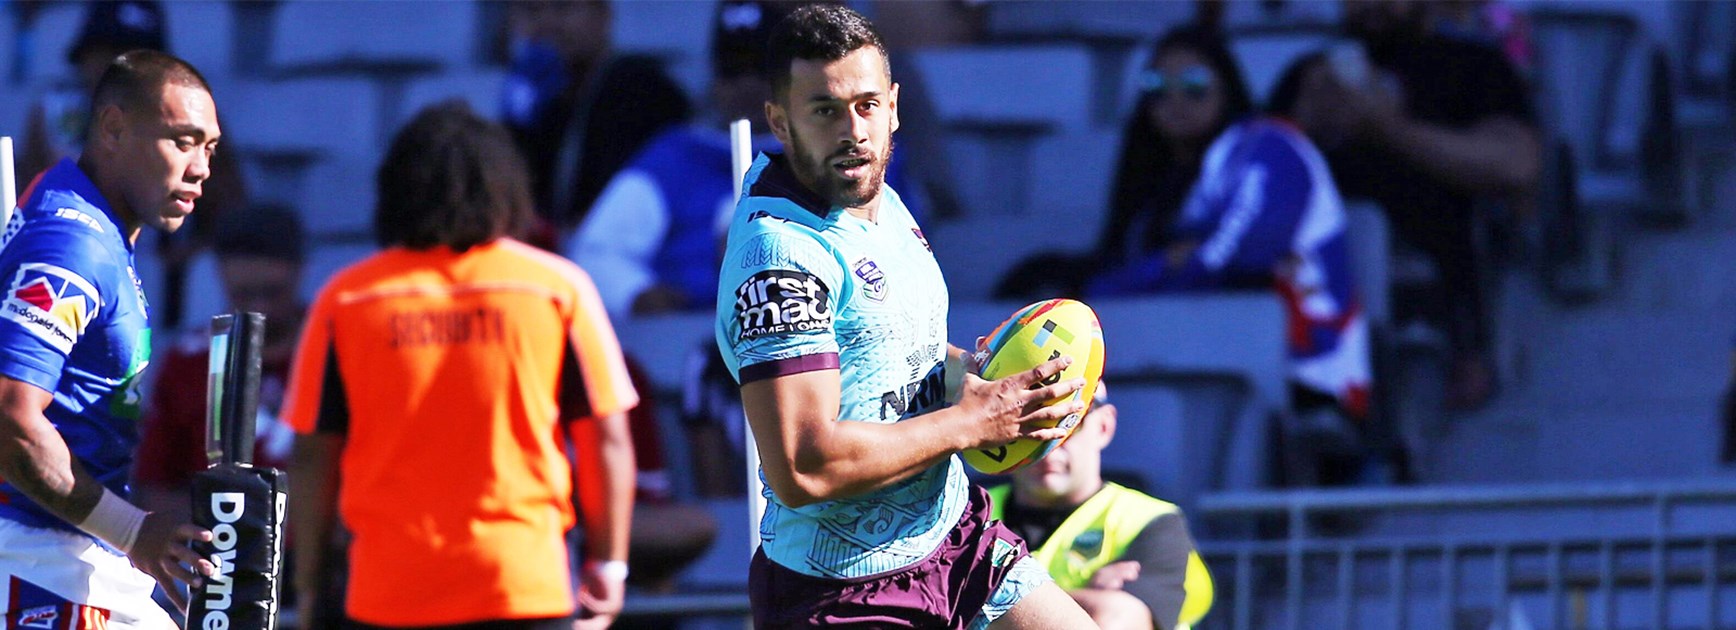 Jordan Kahu scored a hat-trick on the left wing against Newcastle at the Auckland Nines.